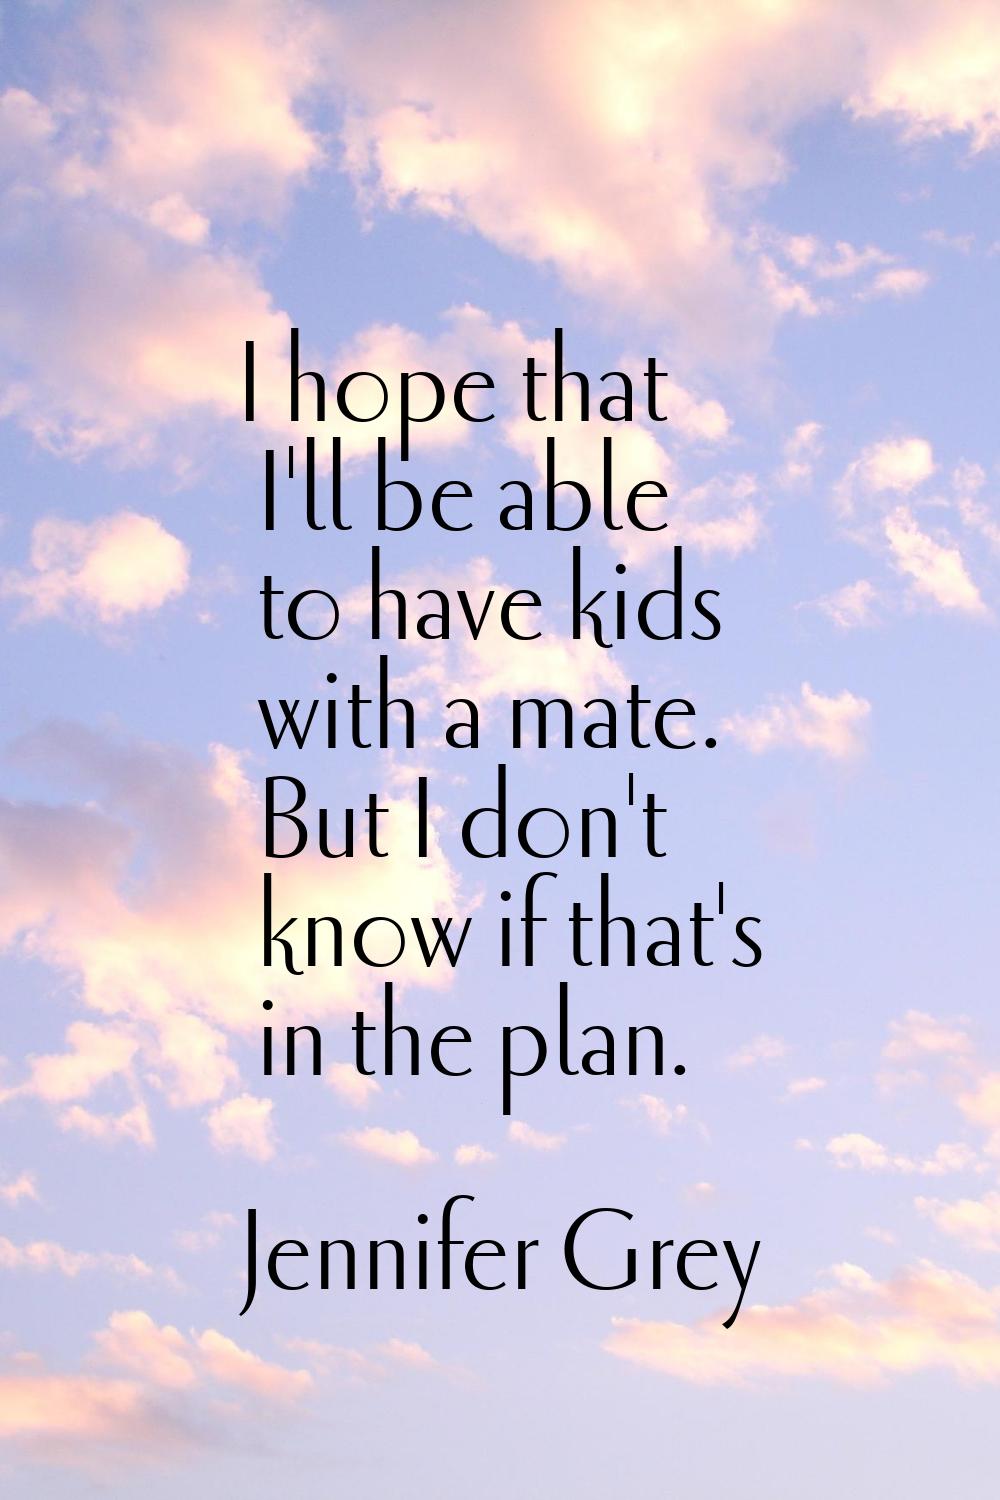 I hope that I'll be able to have kids with a mate. But I don't know if that's in the plan.